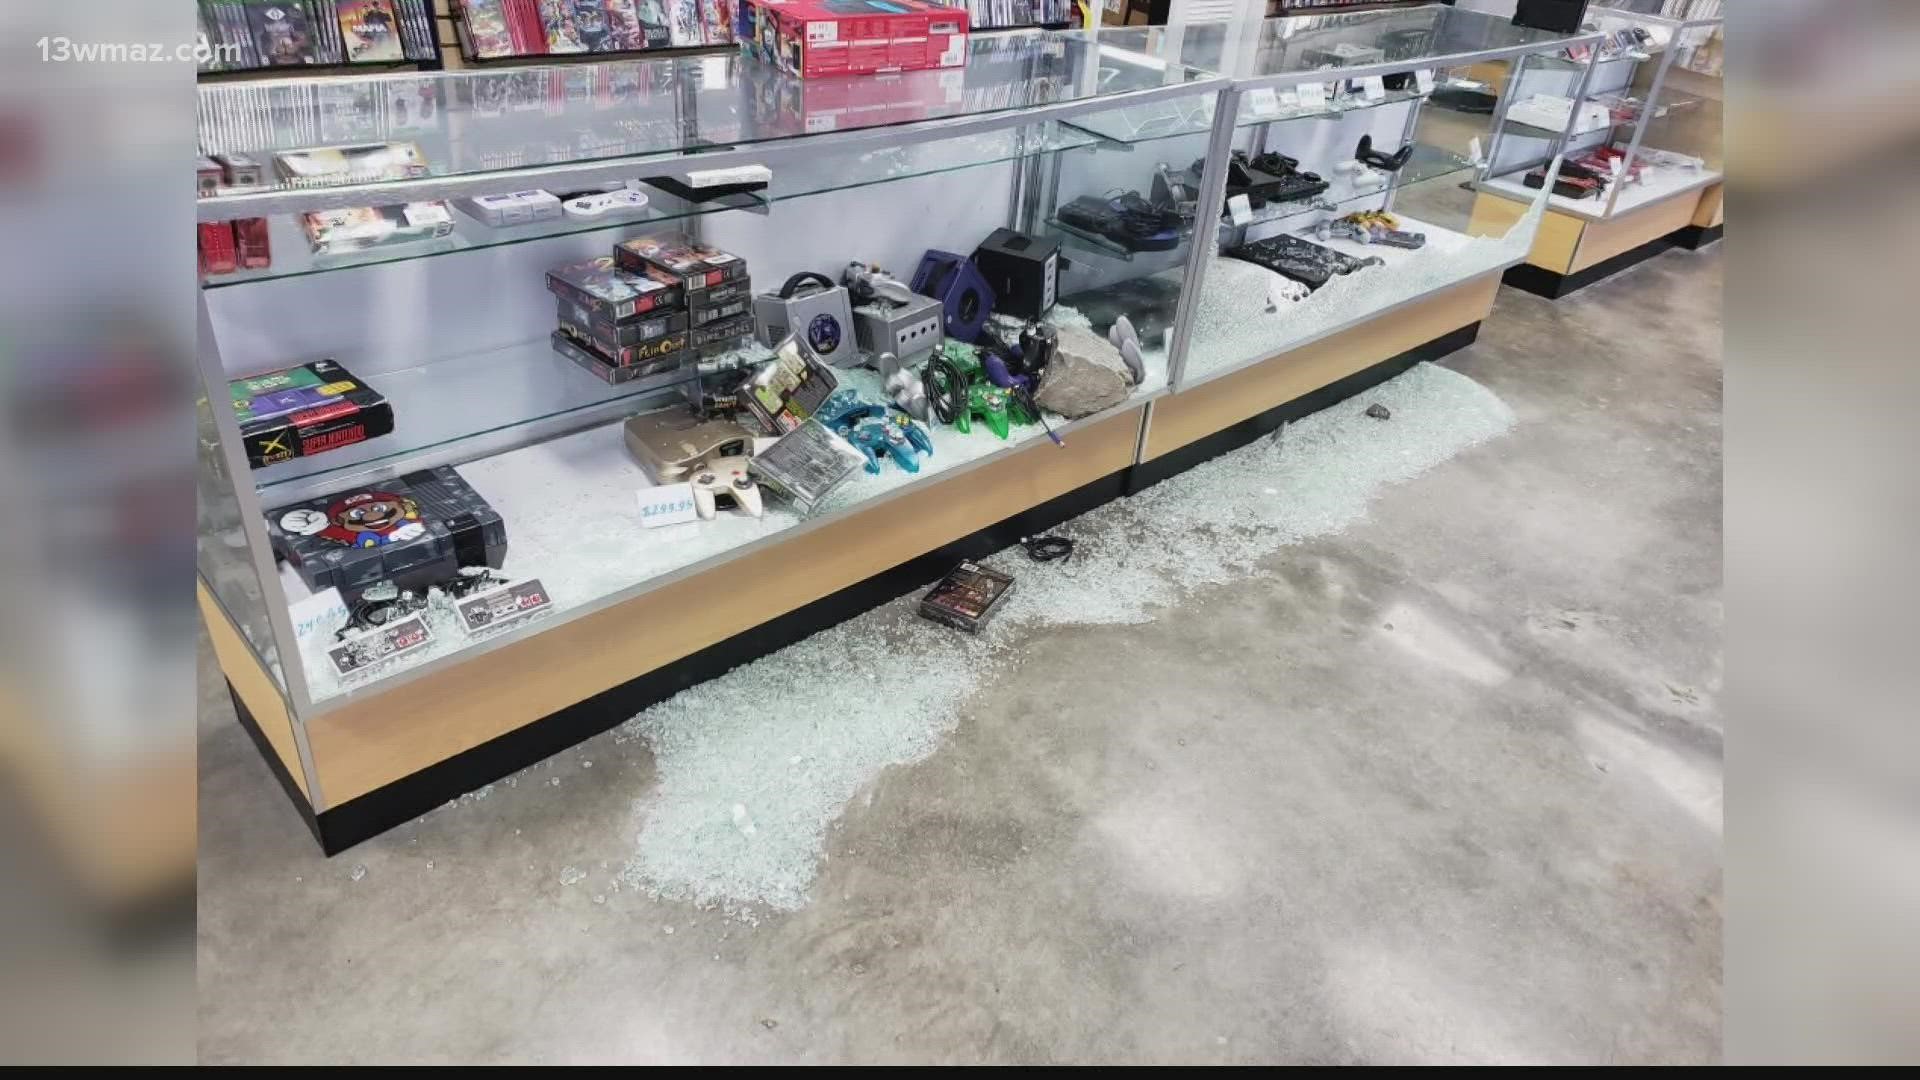 Store owner Aaron Gray told 13WMAZ that surveillance footage shows the burglars using a rock to smash in the door.